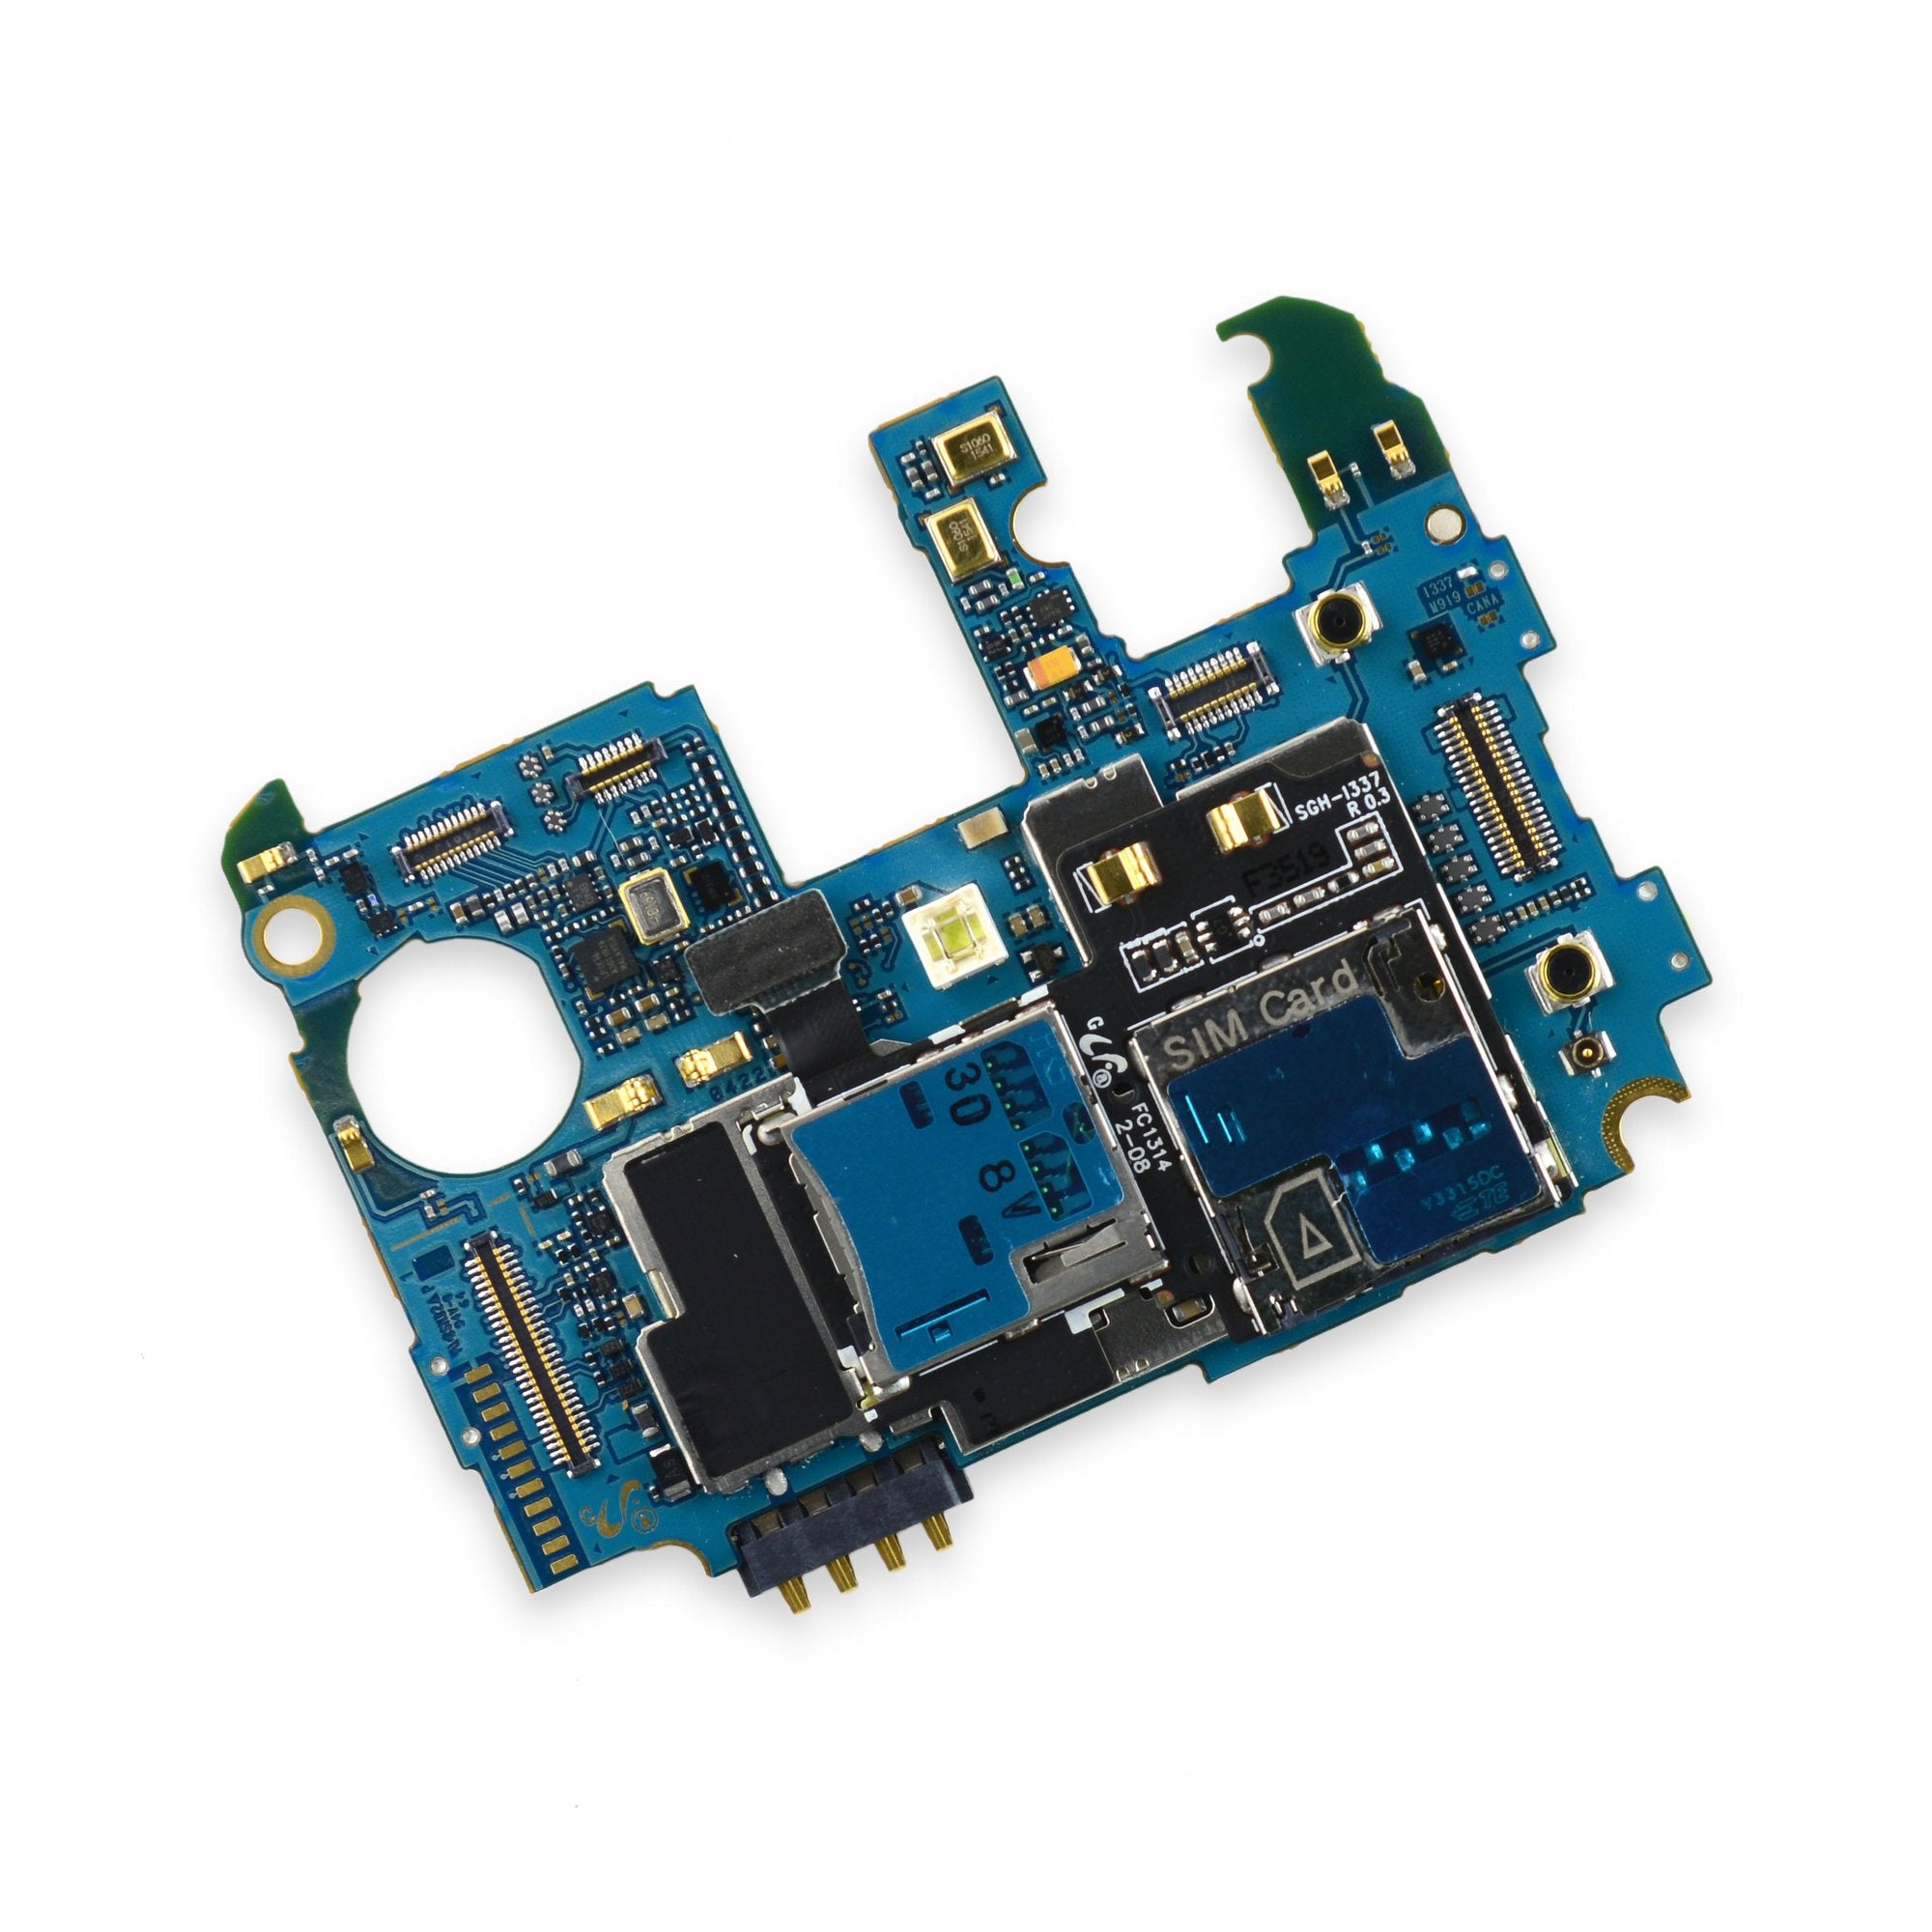 Galaxy S4 (AT&T) Motherboard